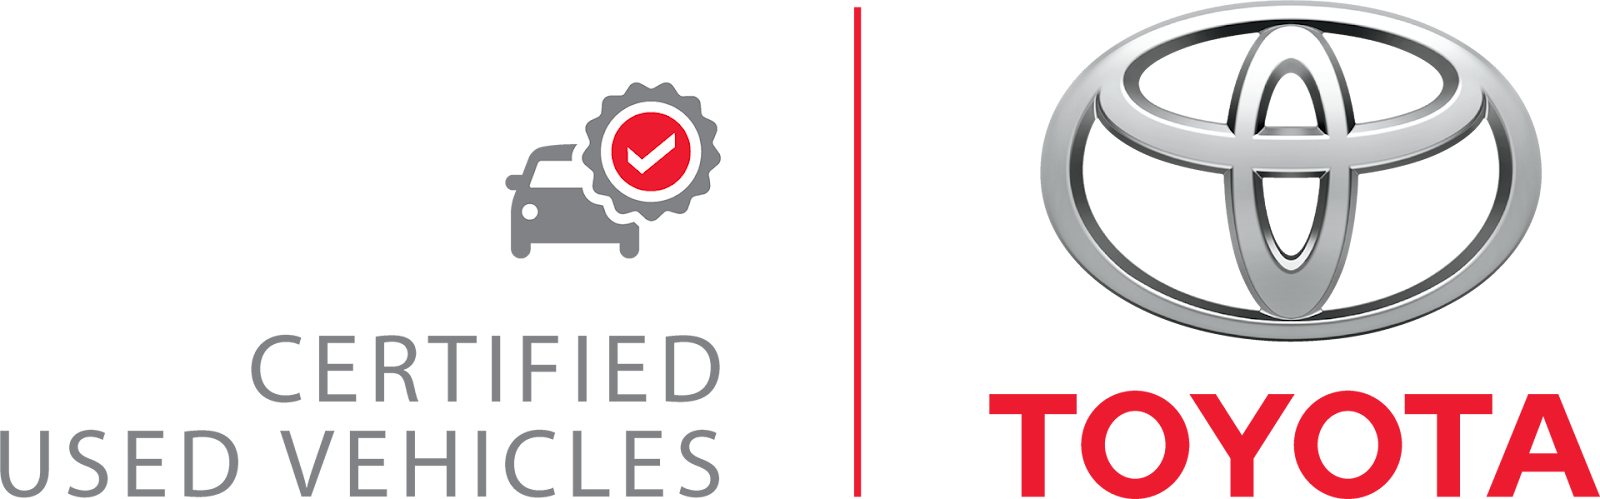 Certified Used Vehicles Toyota Logo